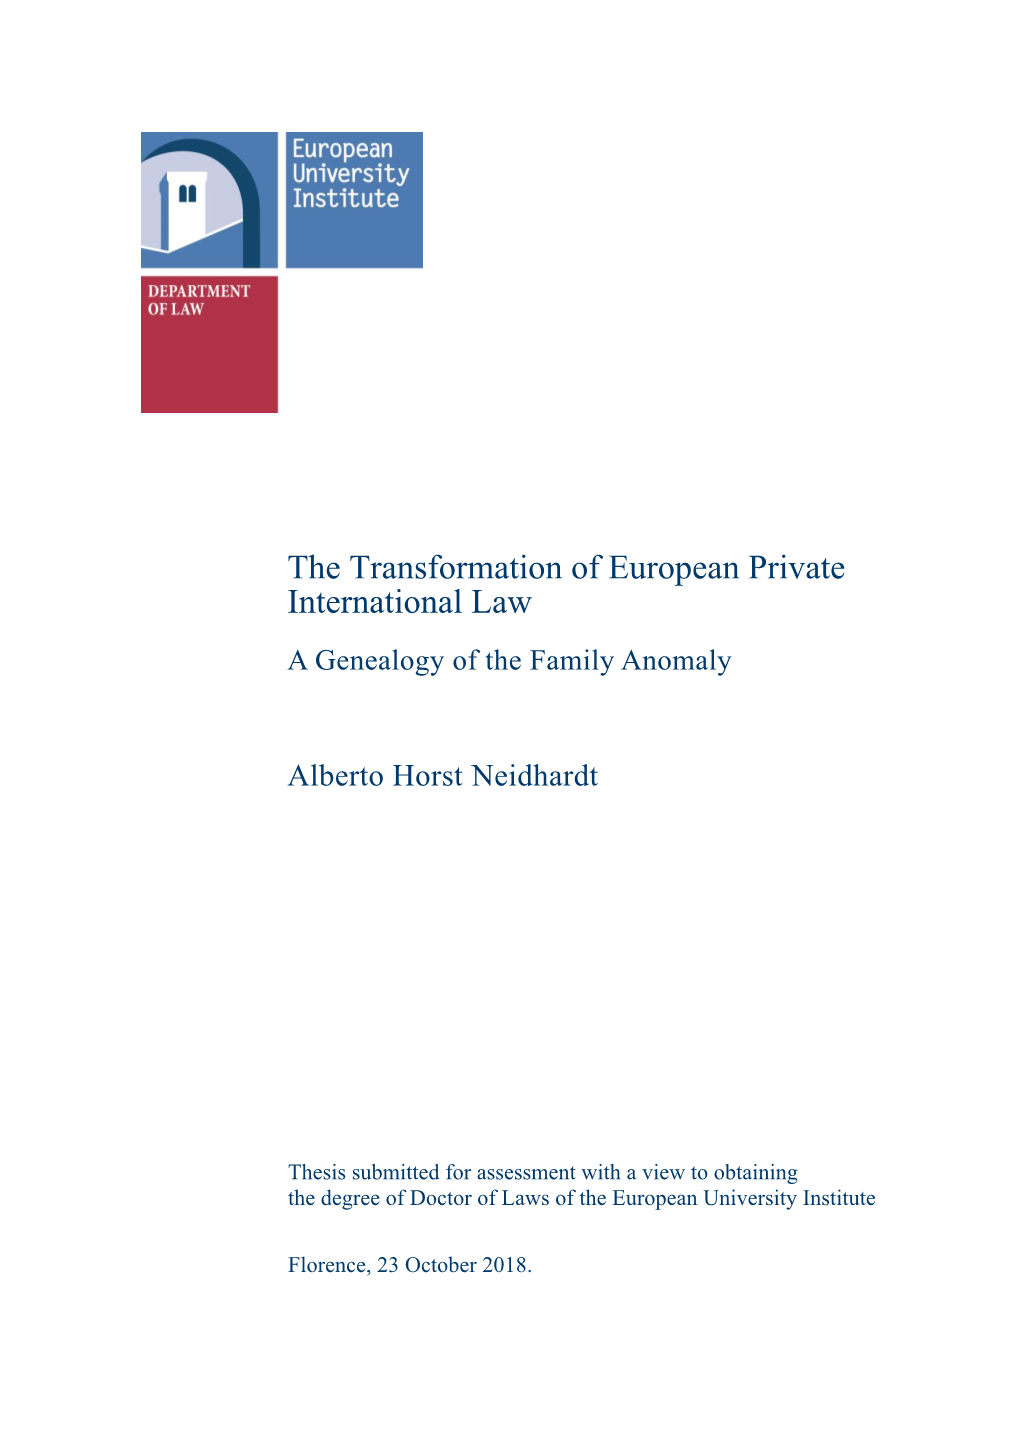 The Transformation of European Private International Law a Genealogy of the Family Anomaly